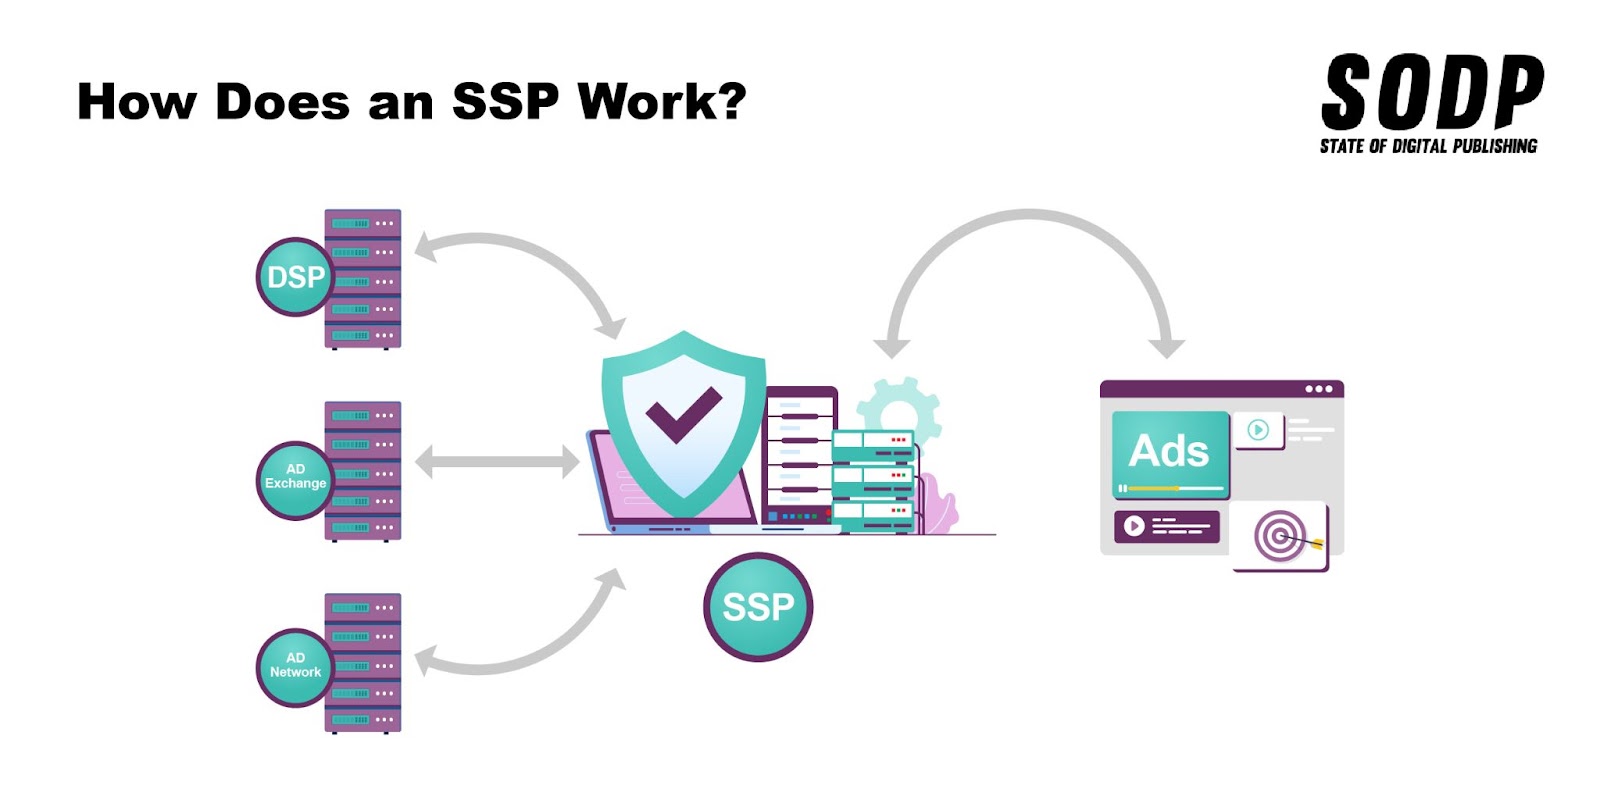 How Does an SSP Work?